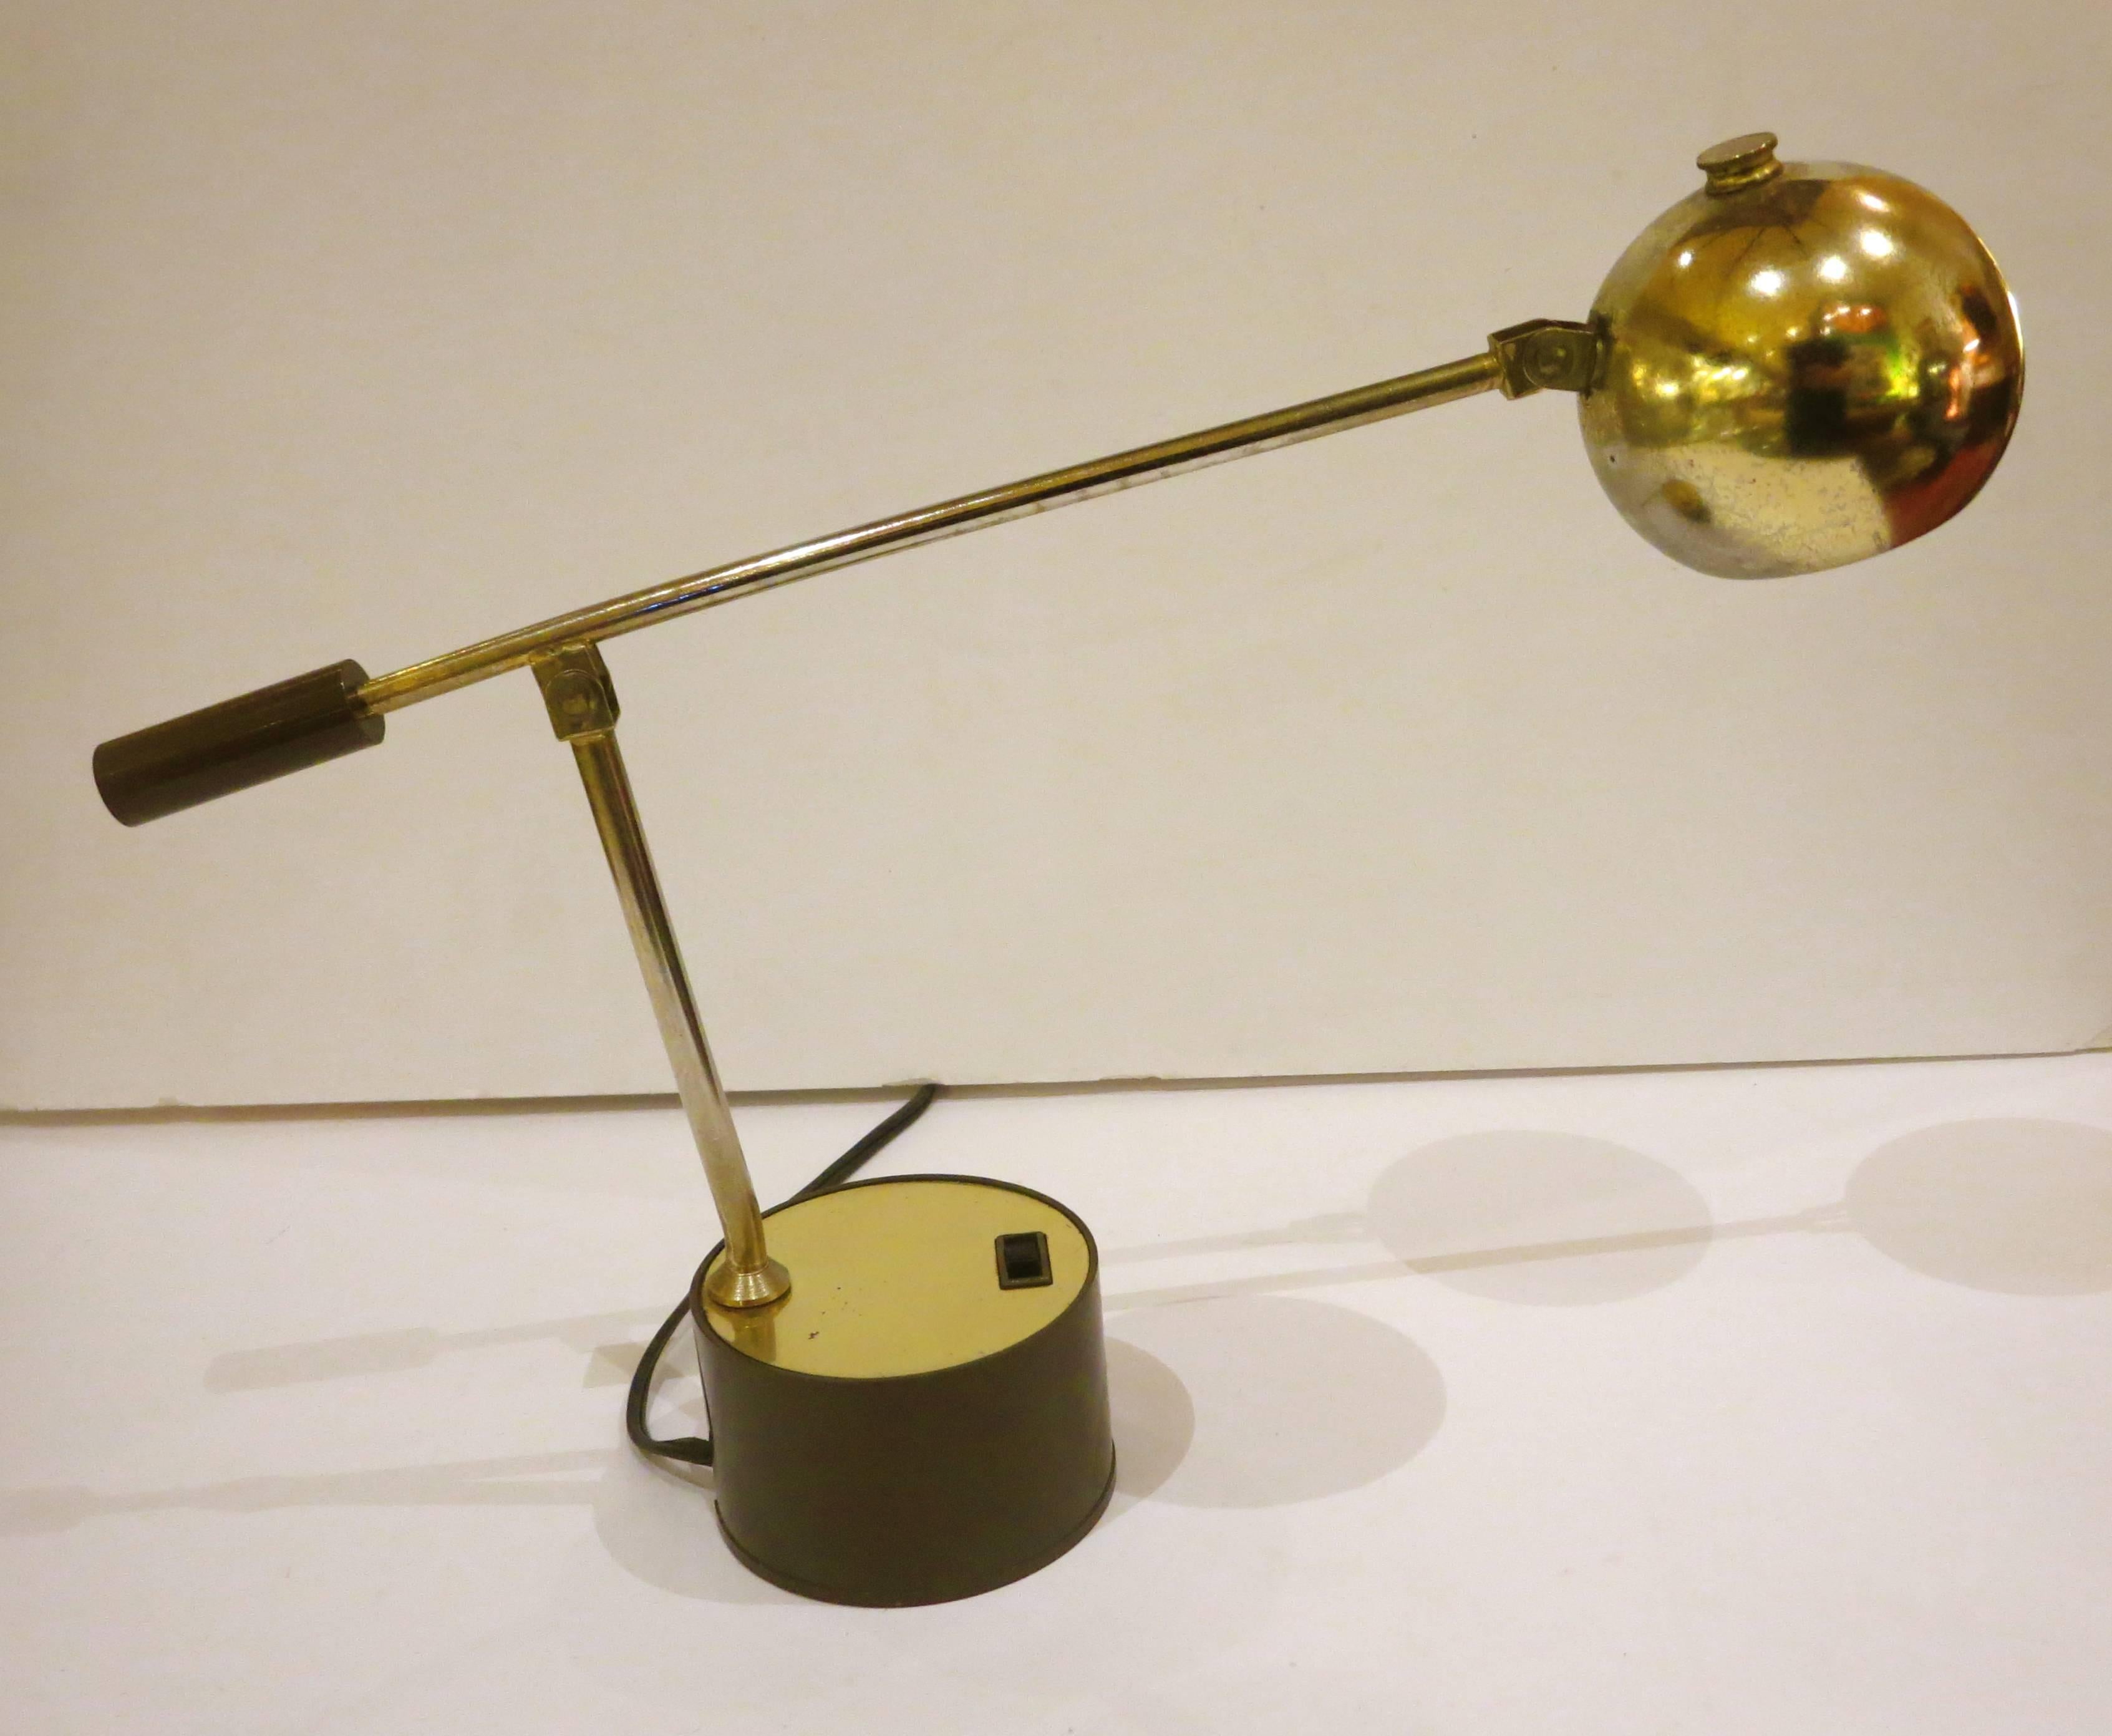 Cool and unique small table lamp, circa 1960s, multidirectional double intensity high and low switch with polished brass and plastic base the shade rotates to 360 degrees and the arm moves up and down, also the shade moves up and down and rotates.